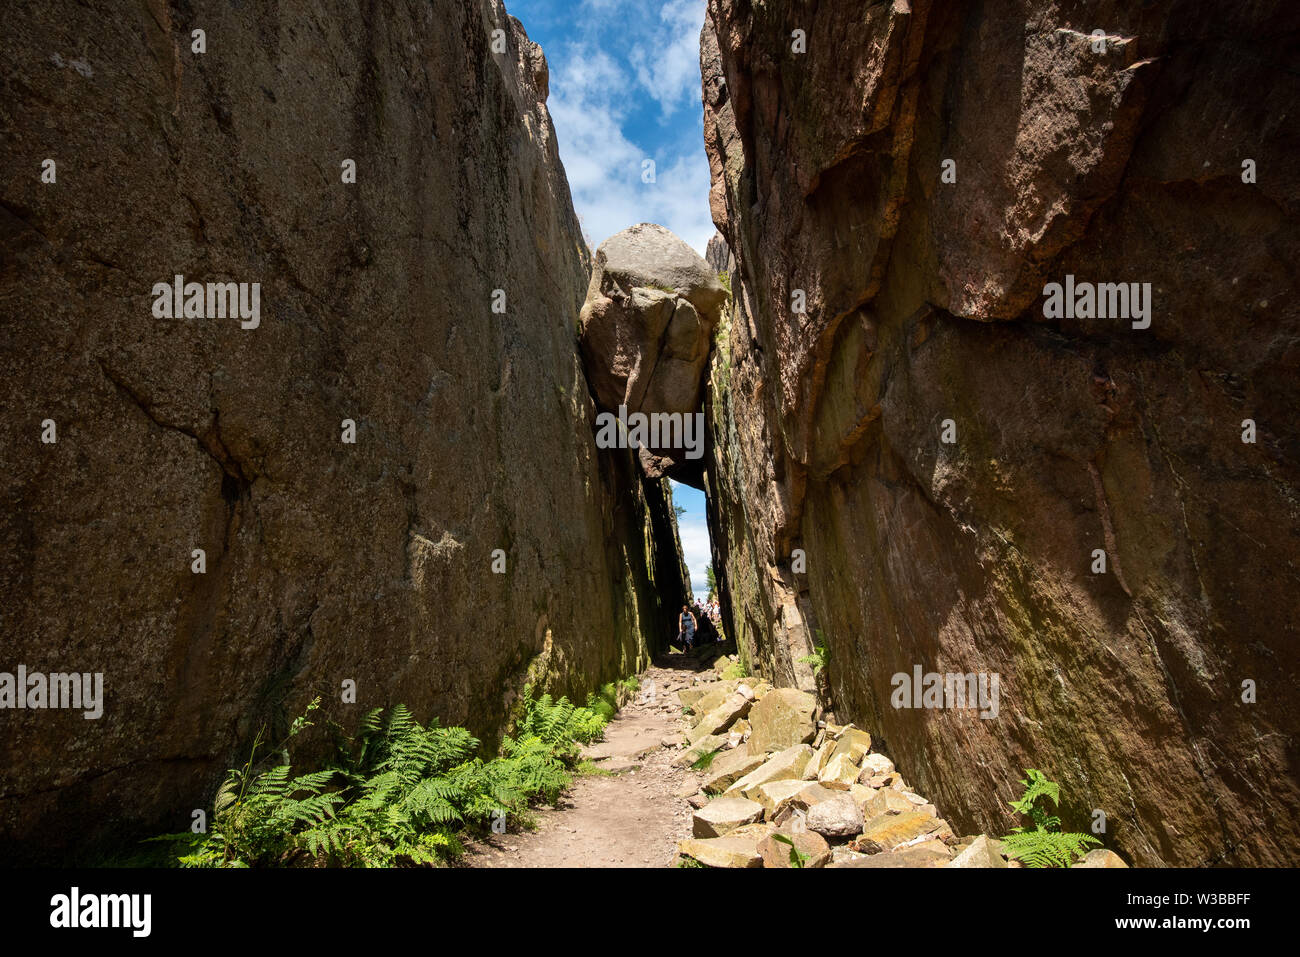 Fjällbacka, Sweden - July 9, 2019: View of the Kungsklyfta gorge in Fjällbacka, where parts of the film Ronja the Robber's Daughter were shot, Western Stock Photo